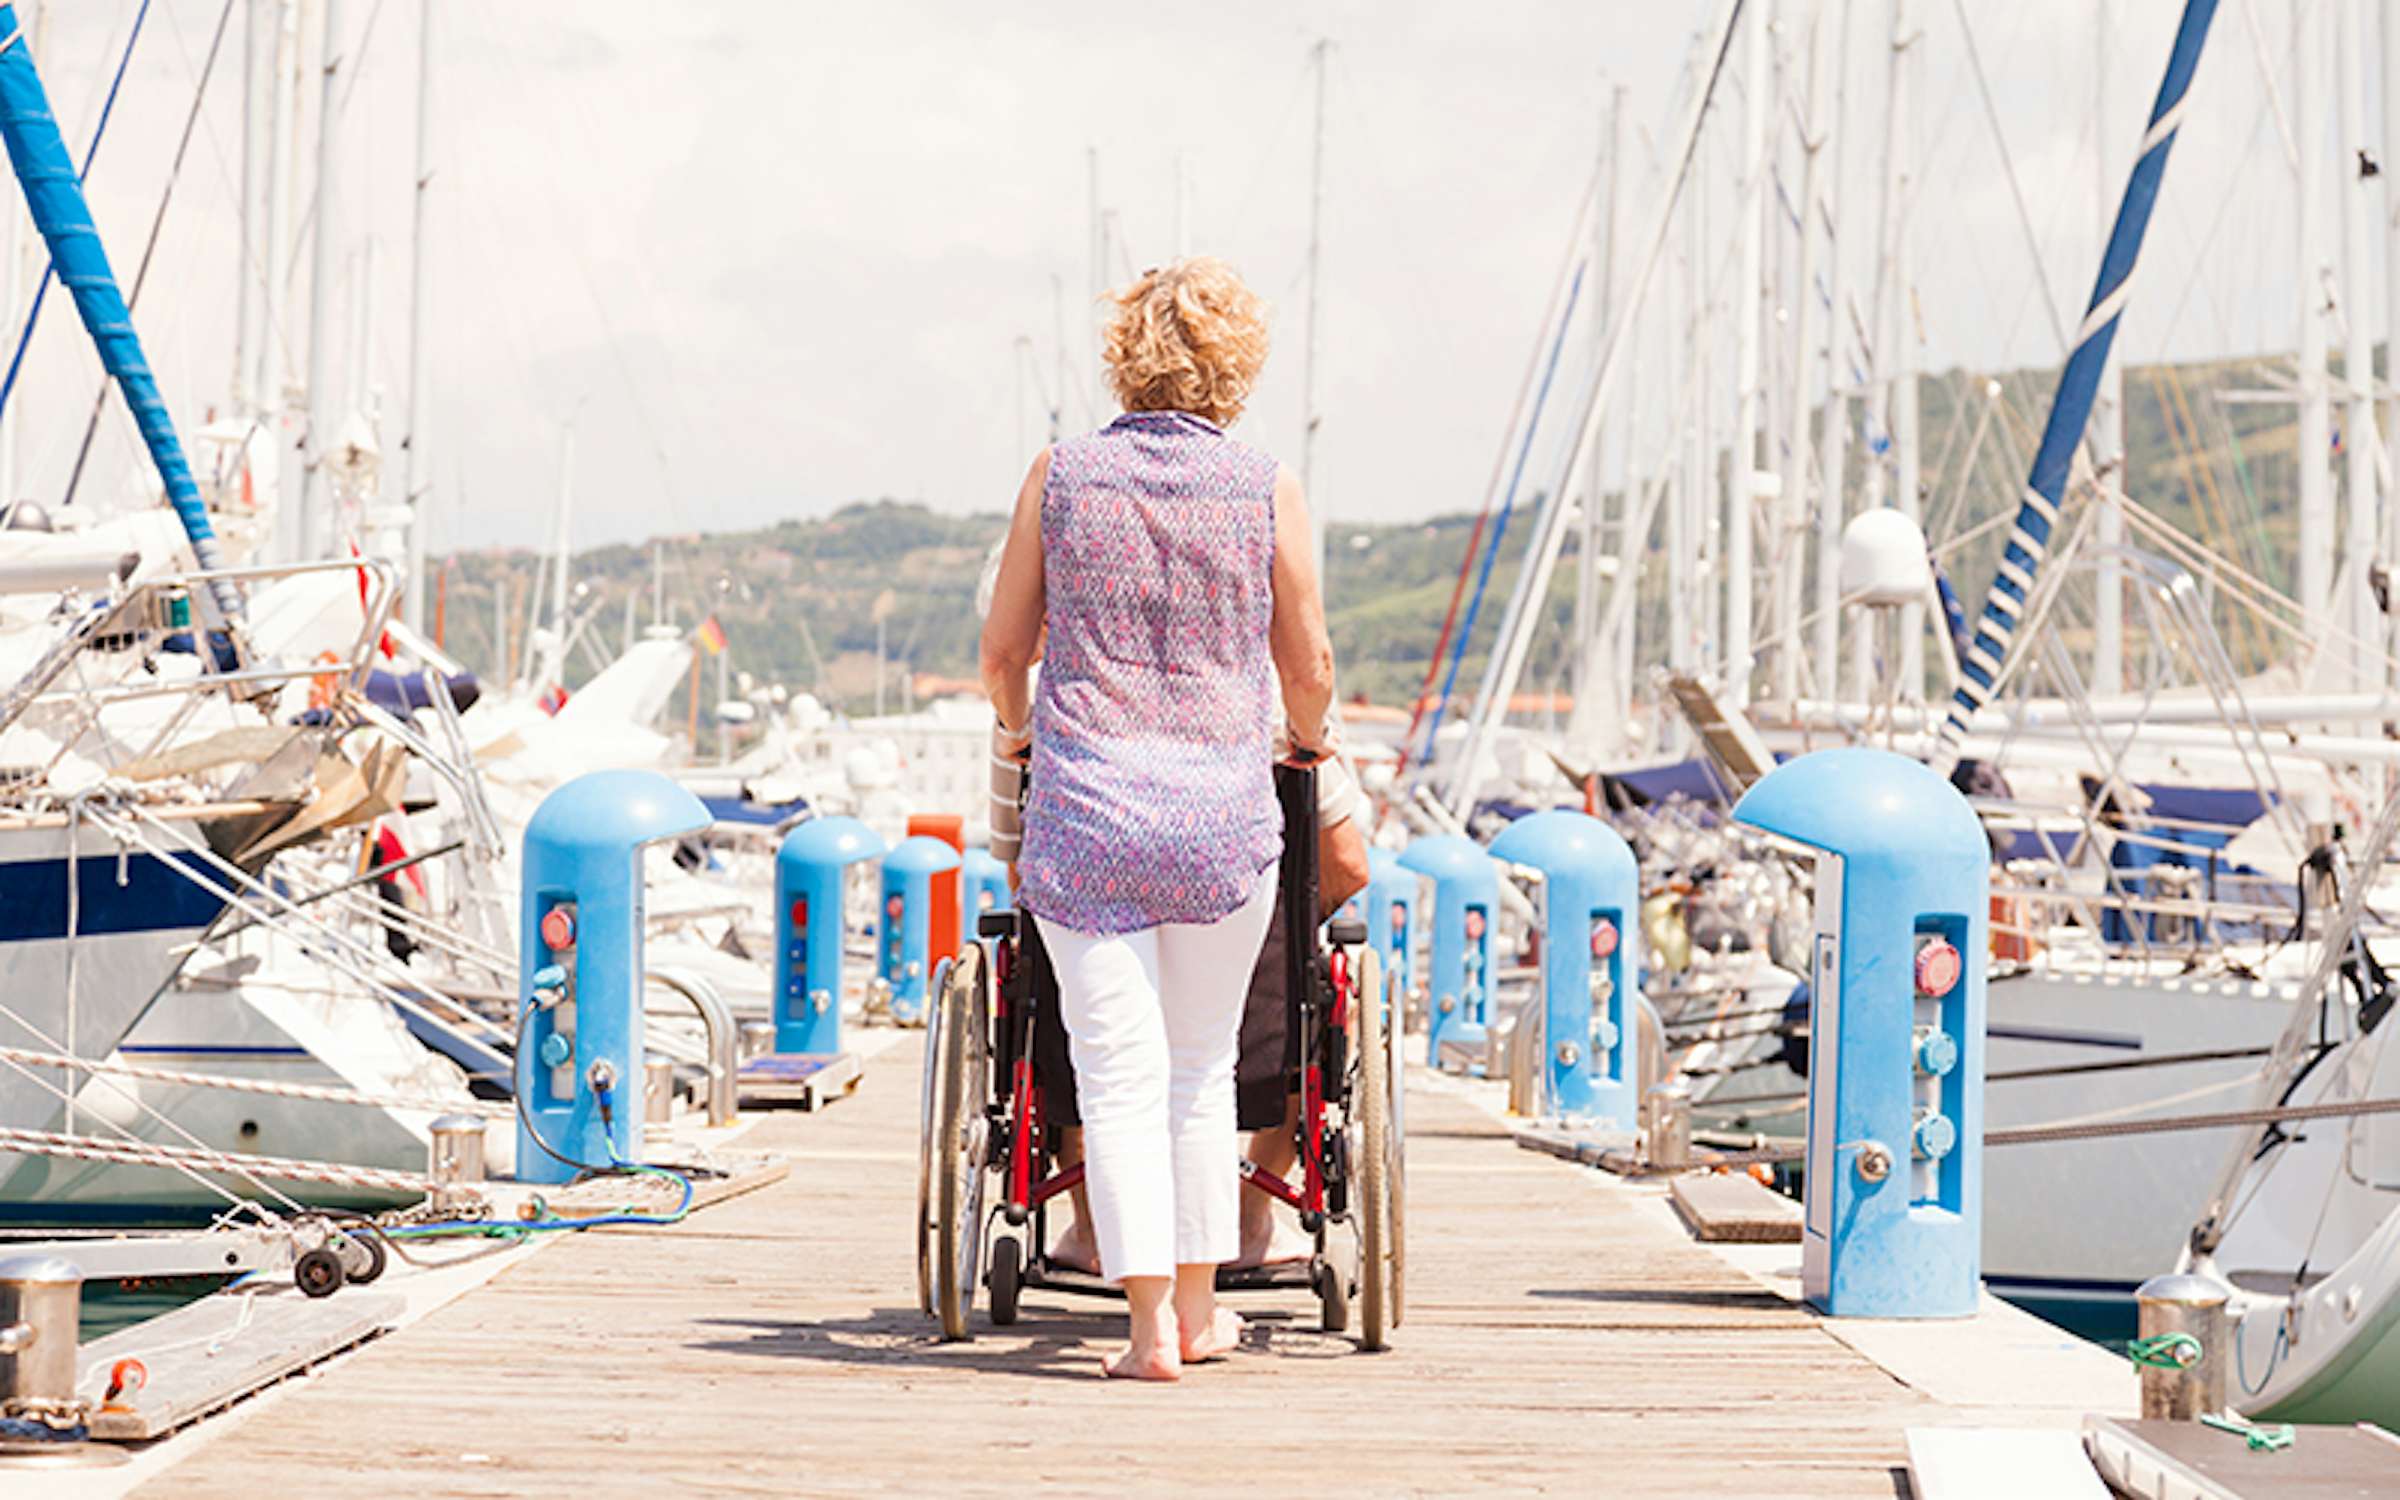 Boating enjoyment for people with disabilities